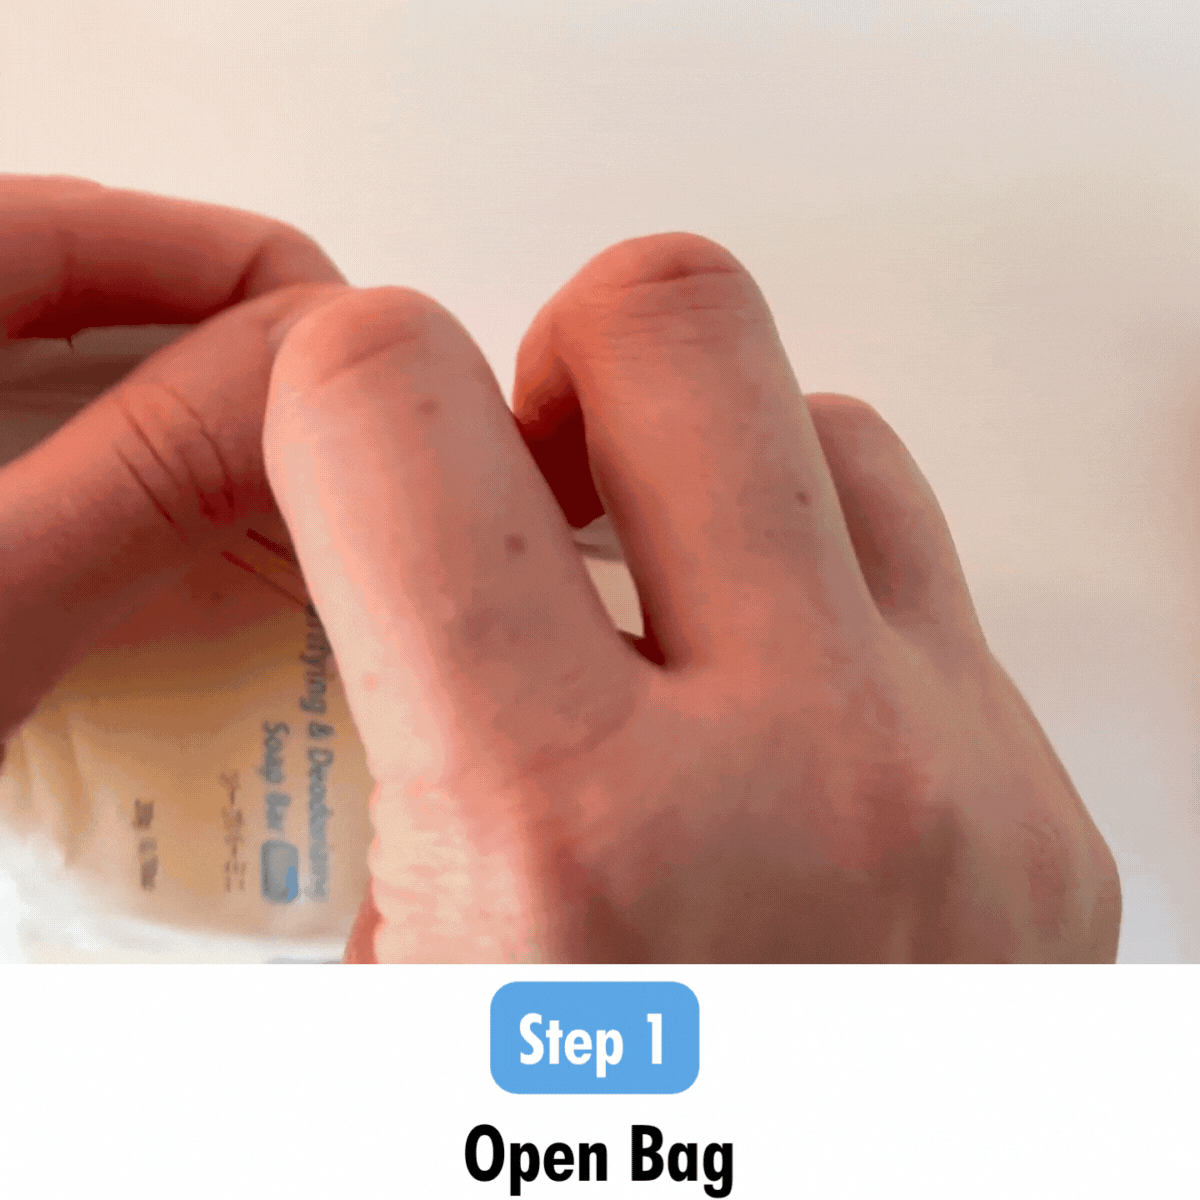 Step 1: Detailed guide on how to open the bag containing the Mini Soap from Mirai Clinical.